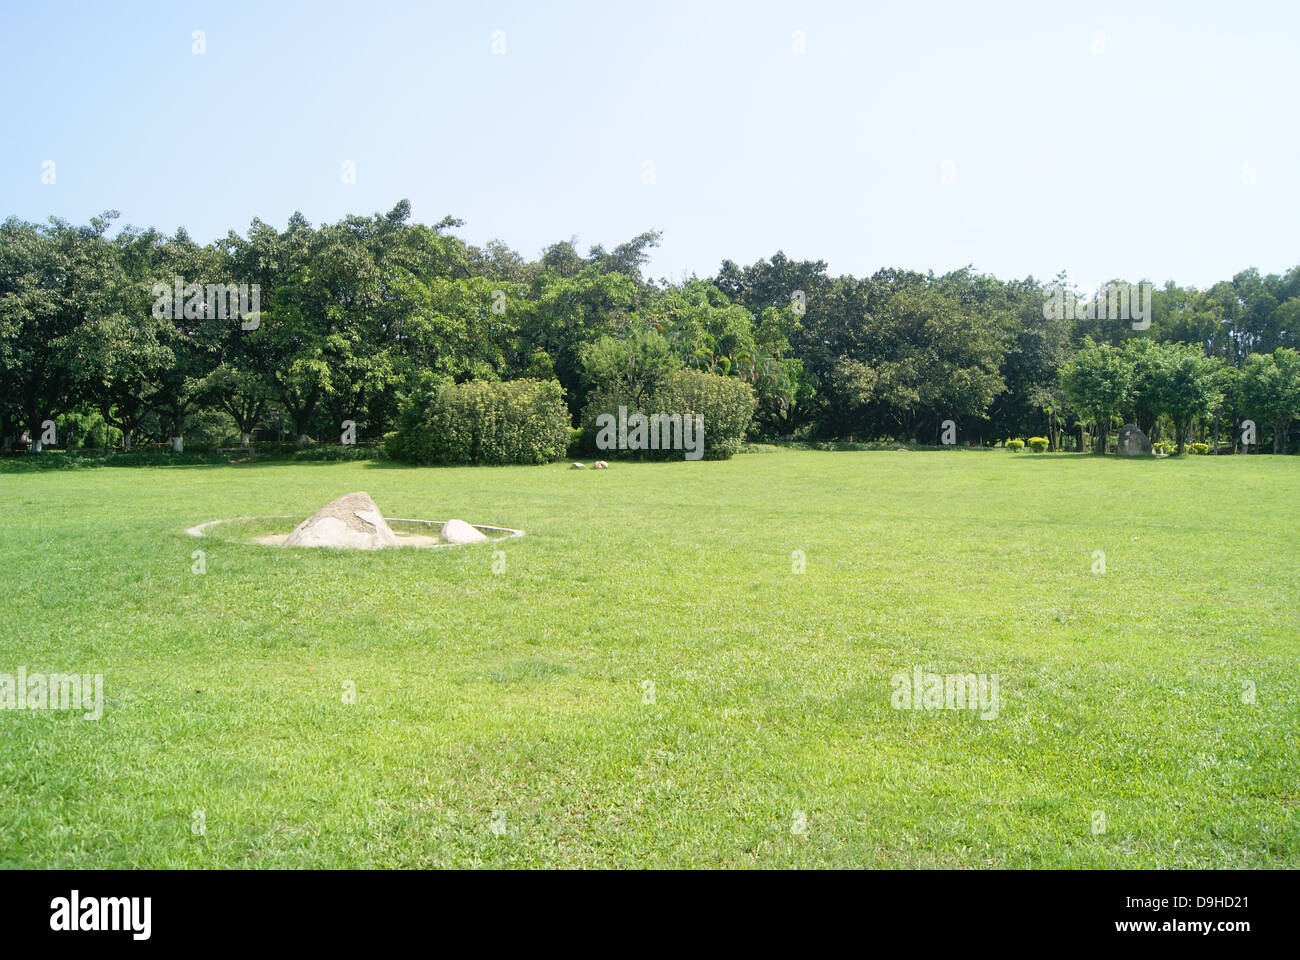 Green lawn, plants, grass, trees, scenery, travel, attractions, shenzhen, China, Asia Stock Photo